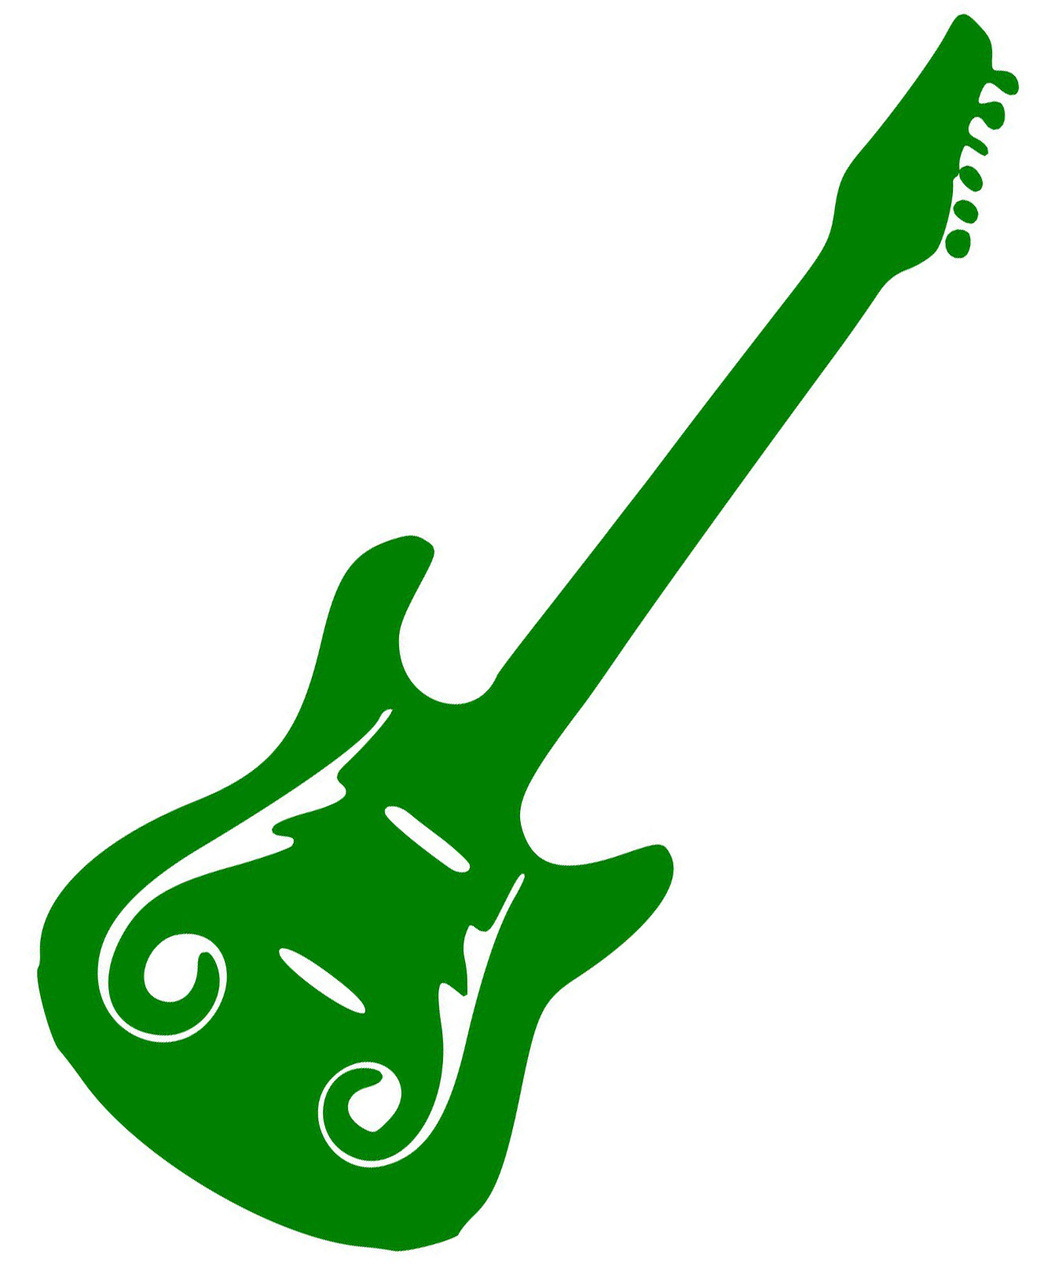 Buy Guitar - Vinyl Decal Sticker - Electric Acoustic Classical String ...
